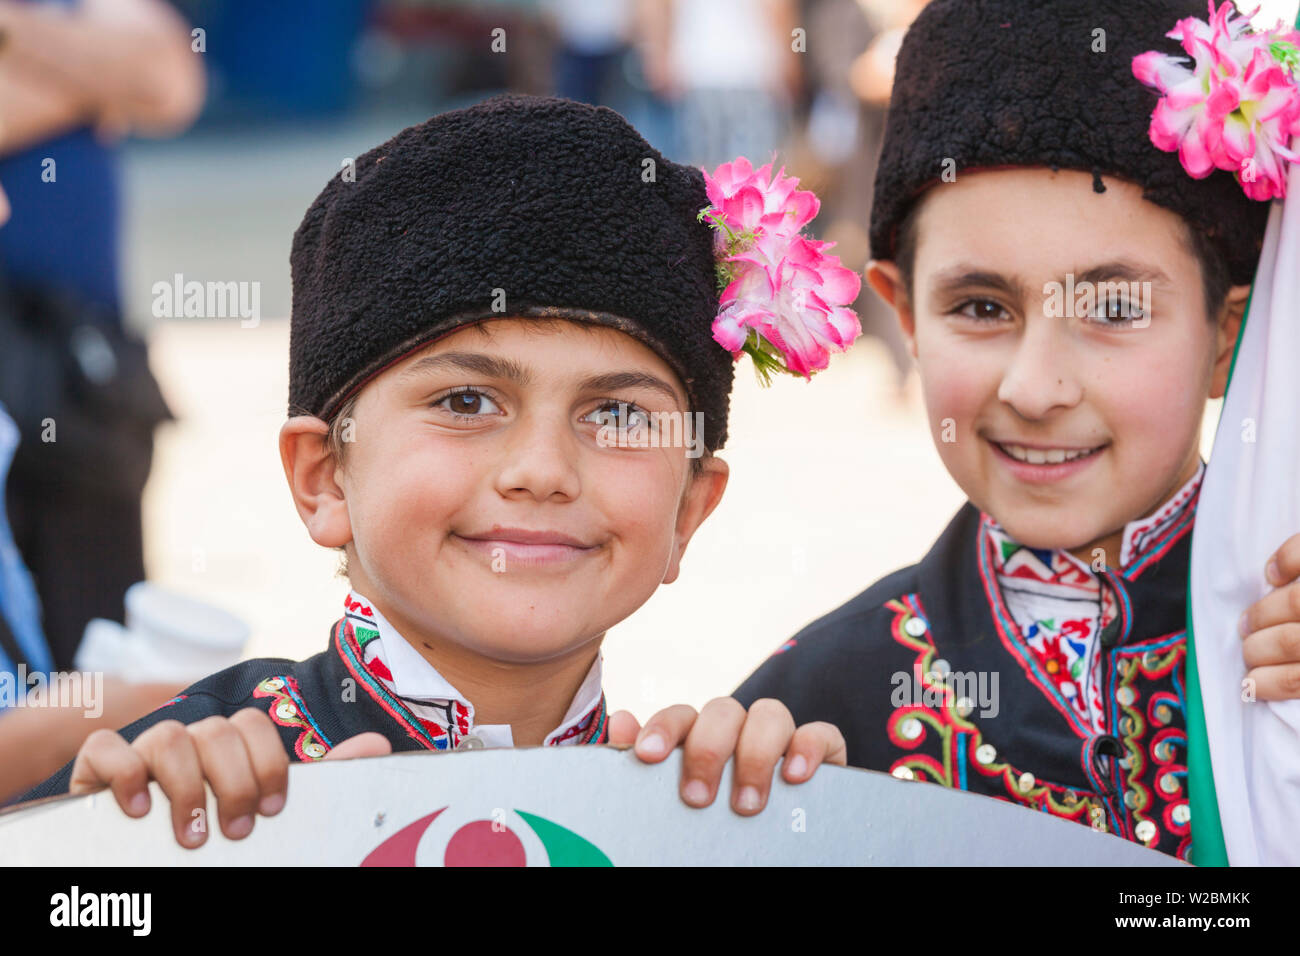 Bulgaria, Central Mountains, Kazanlak, Kazanlak Rose Festival, town produces 60% of the world's rose oil, young boys in traditional costumes, NR Stock Photo